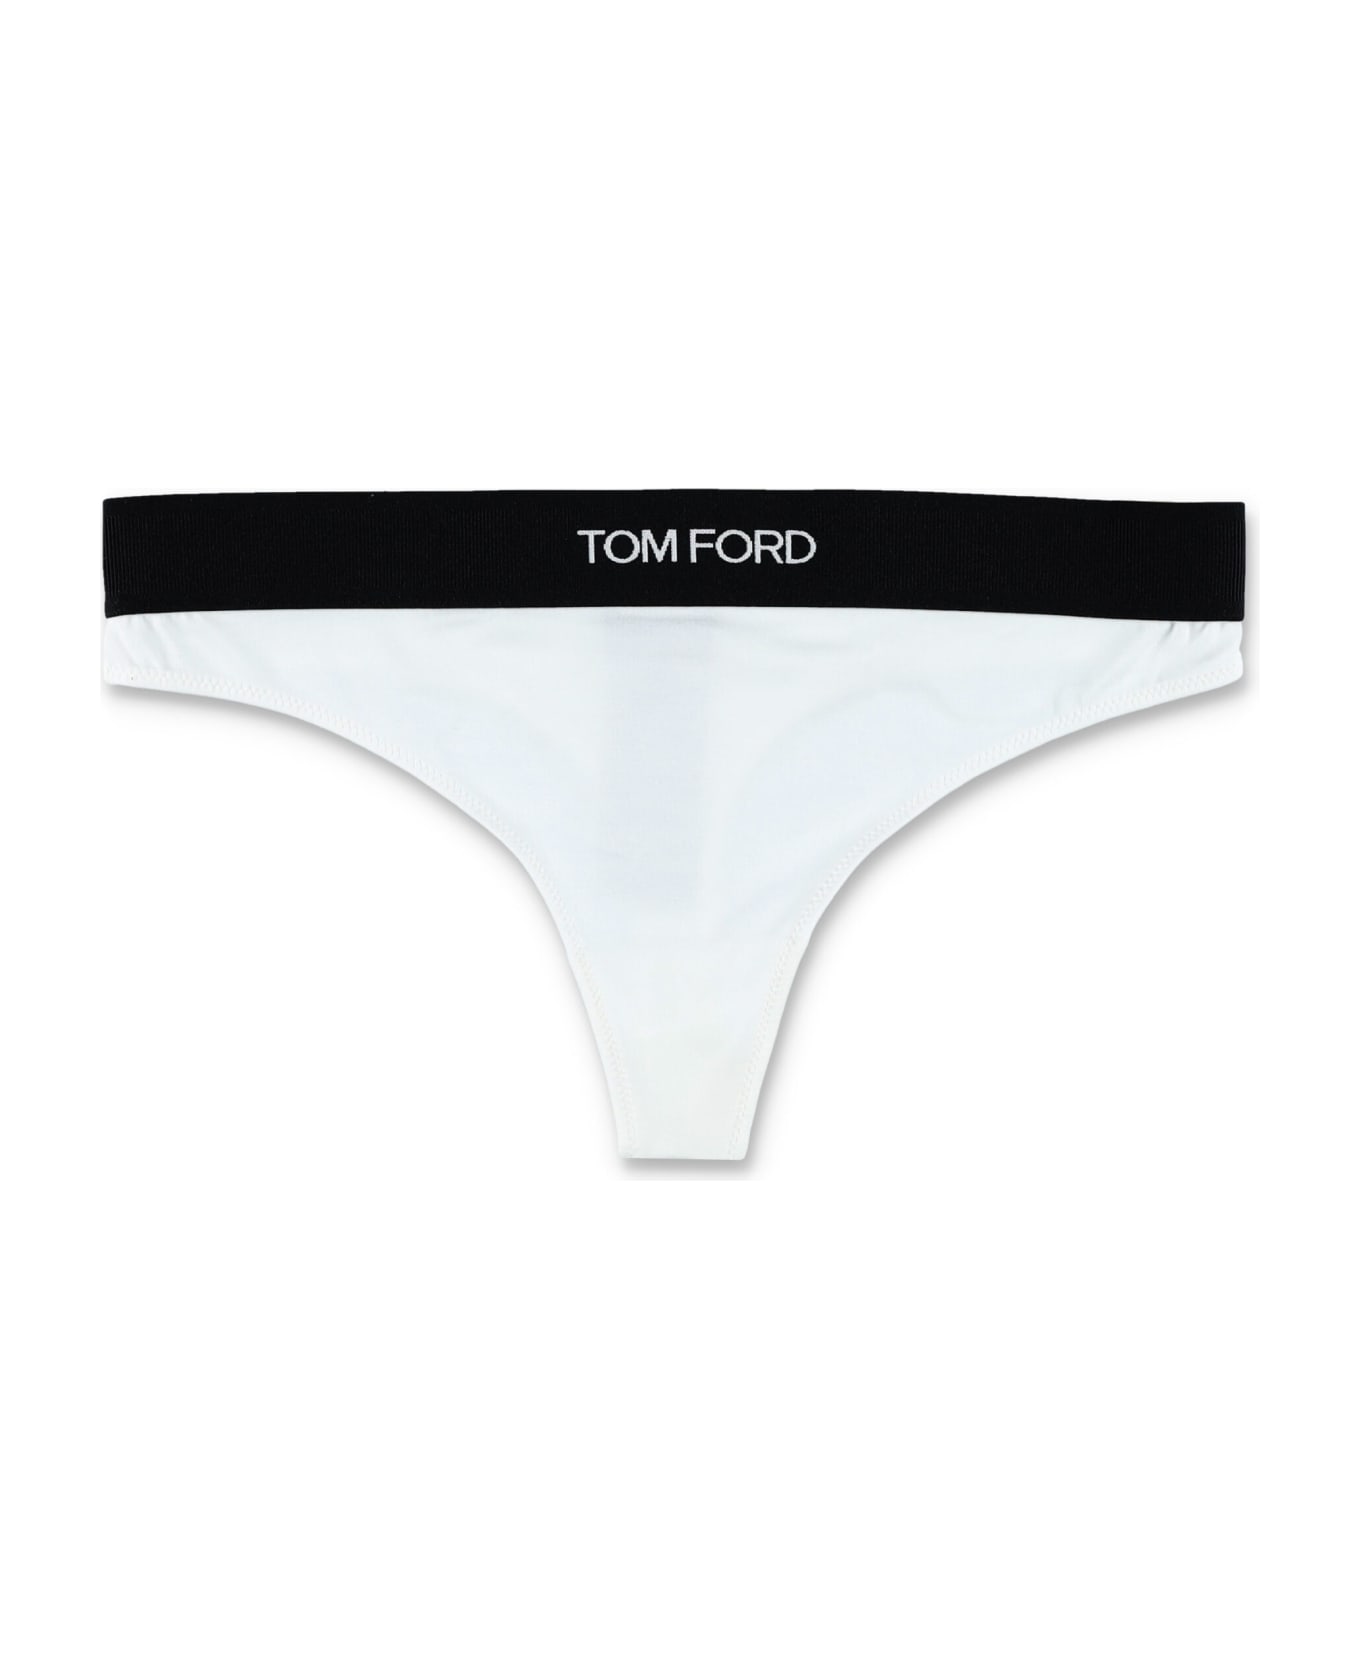 Tom Ford Brief With Logo - WHITE ショーツ